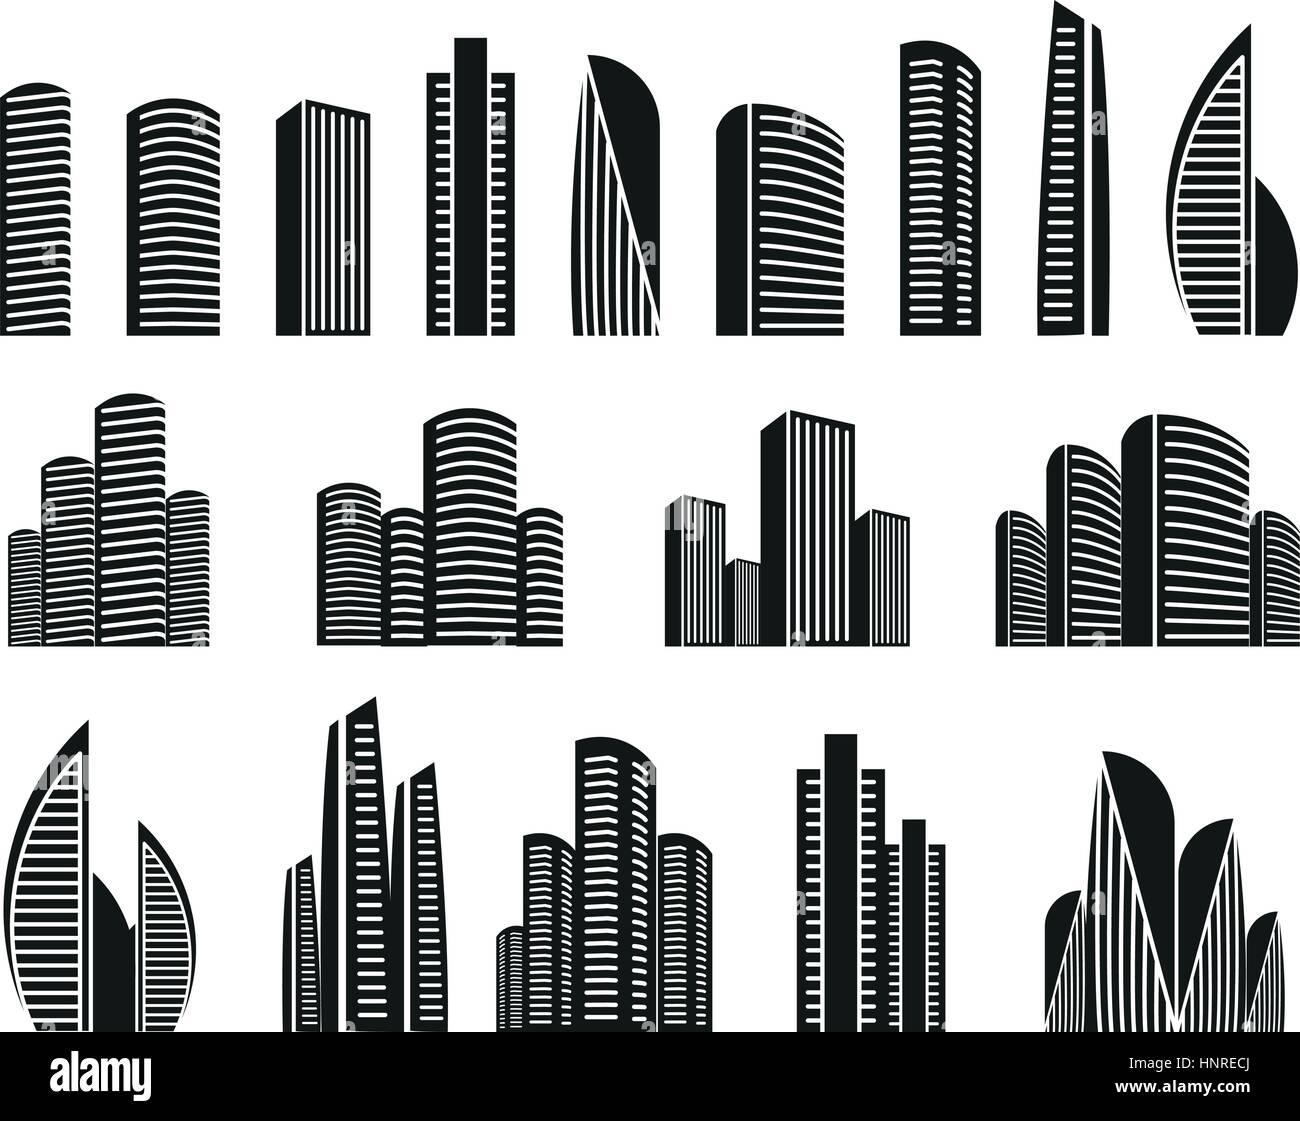 Isolated black and white color skyscrapers in lineart style icons collection, elements of urban architectural buildings vector illustrations set. Stock Vector